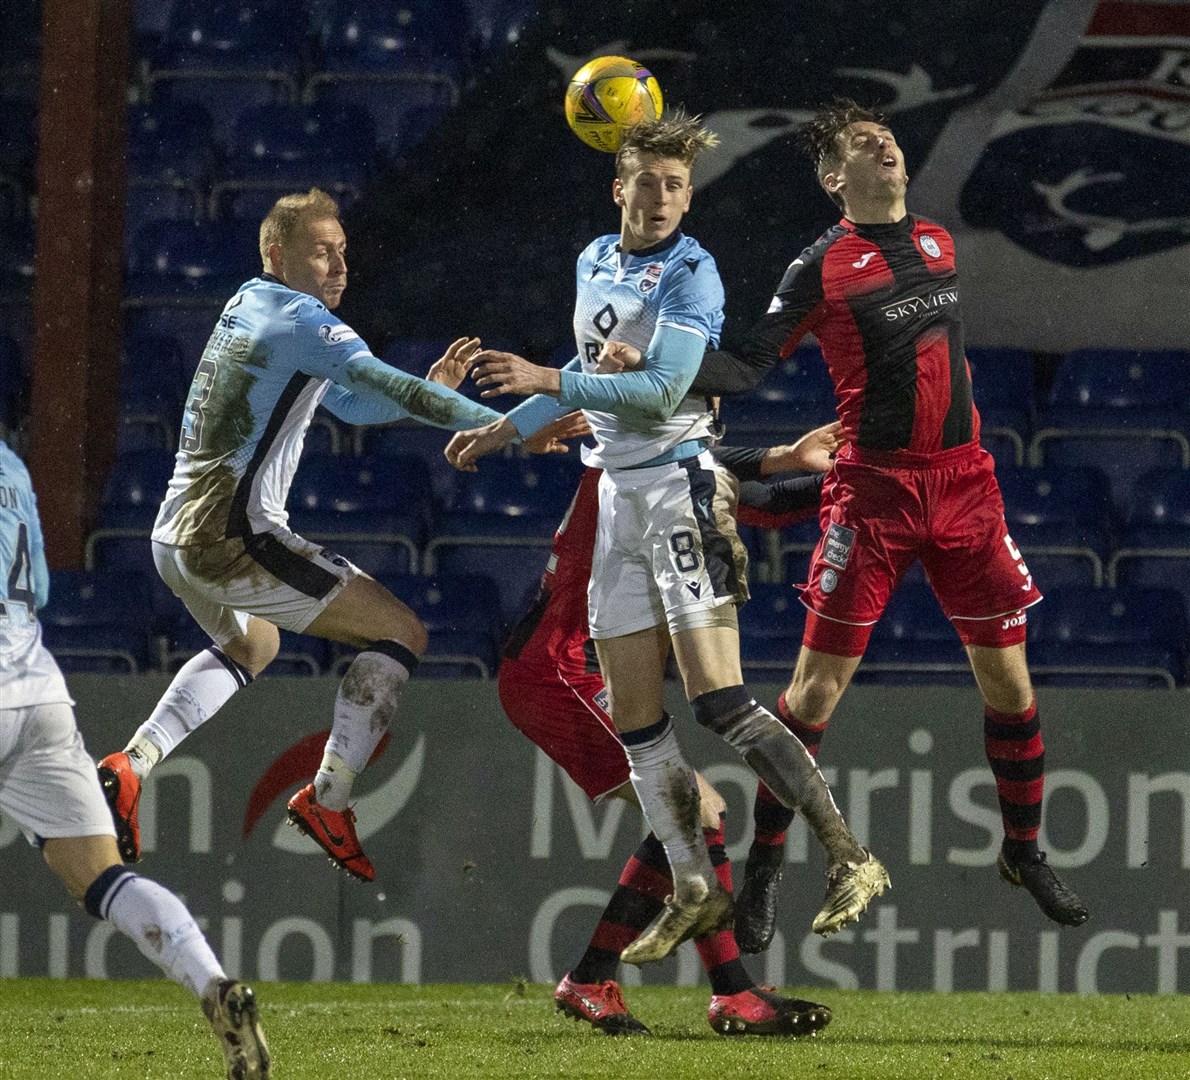 Picture - Ken Macpherson, Inverness. Ross County(0) v St.Mirren(2). 26.12.20. Ross County's Carl Tremarco and Oli Shaw combine to head clear from St.Mirren's Conor McCarthy.